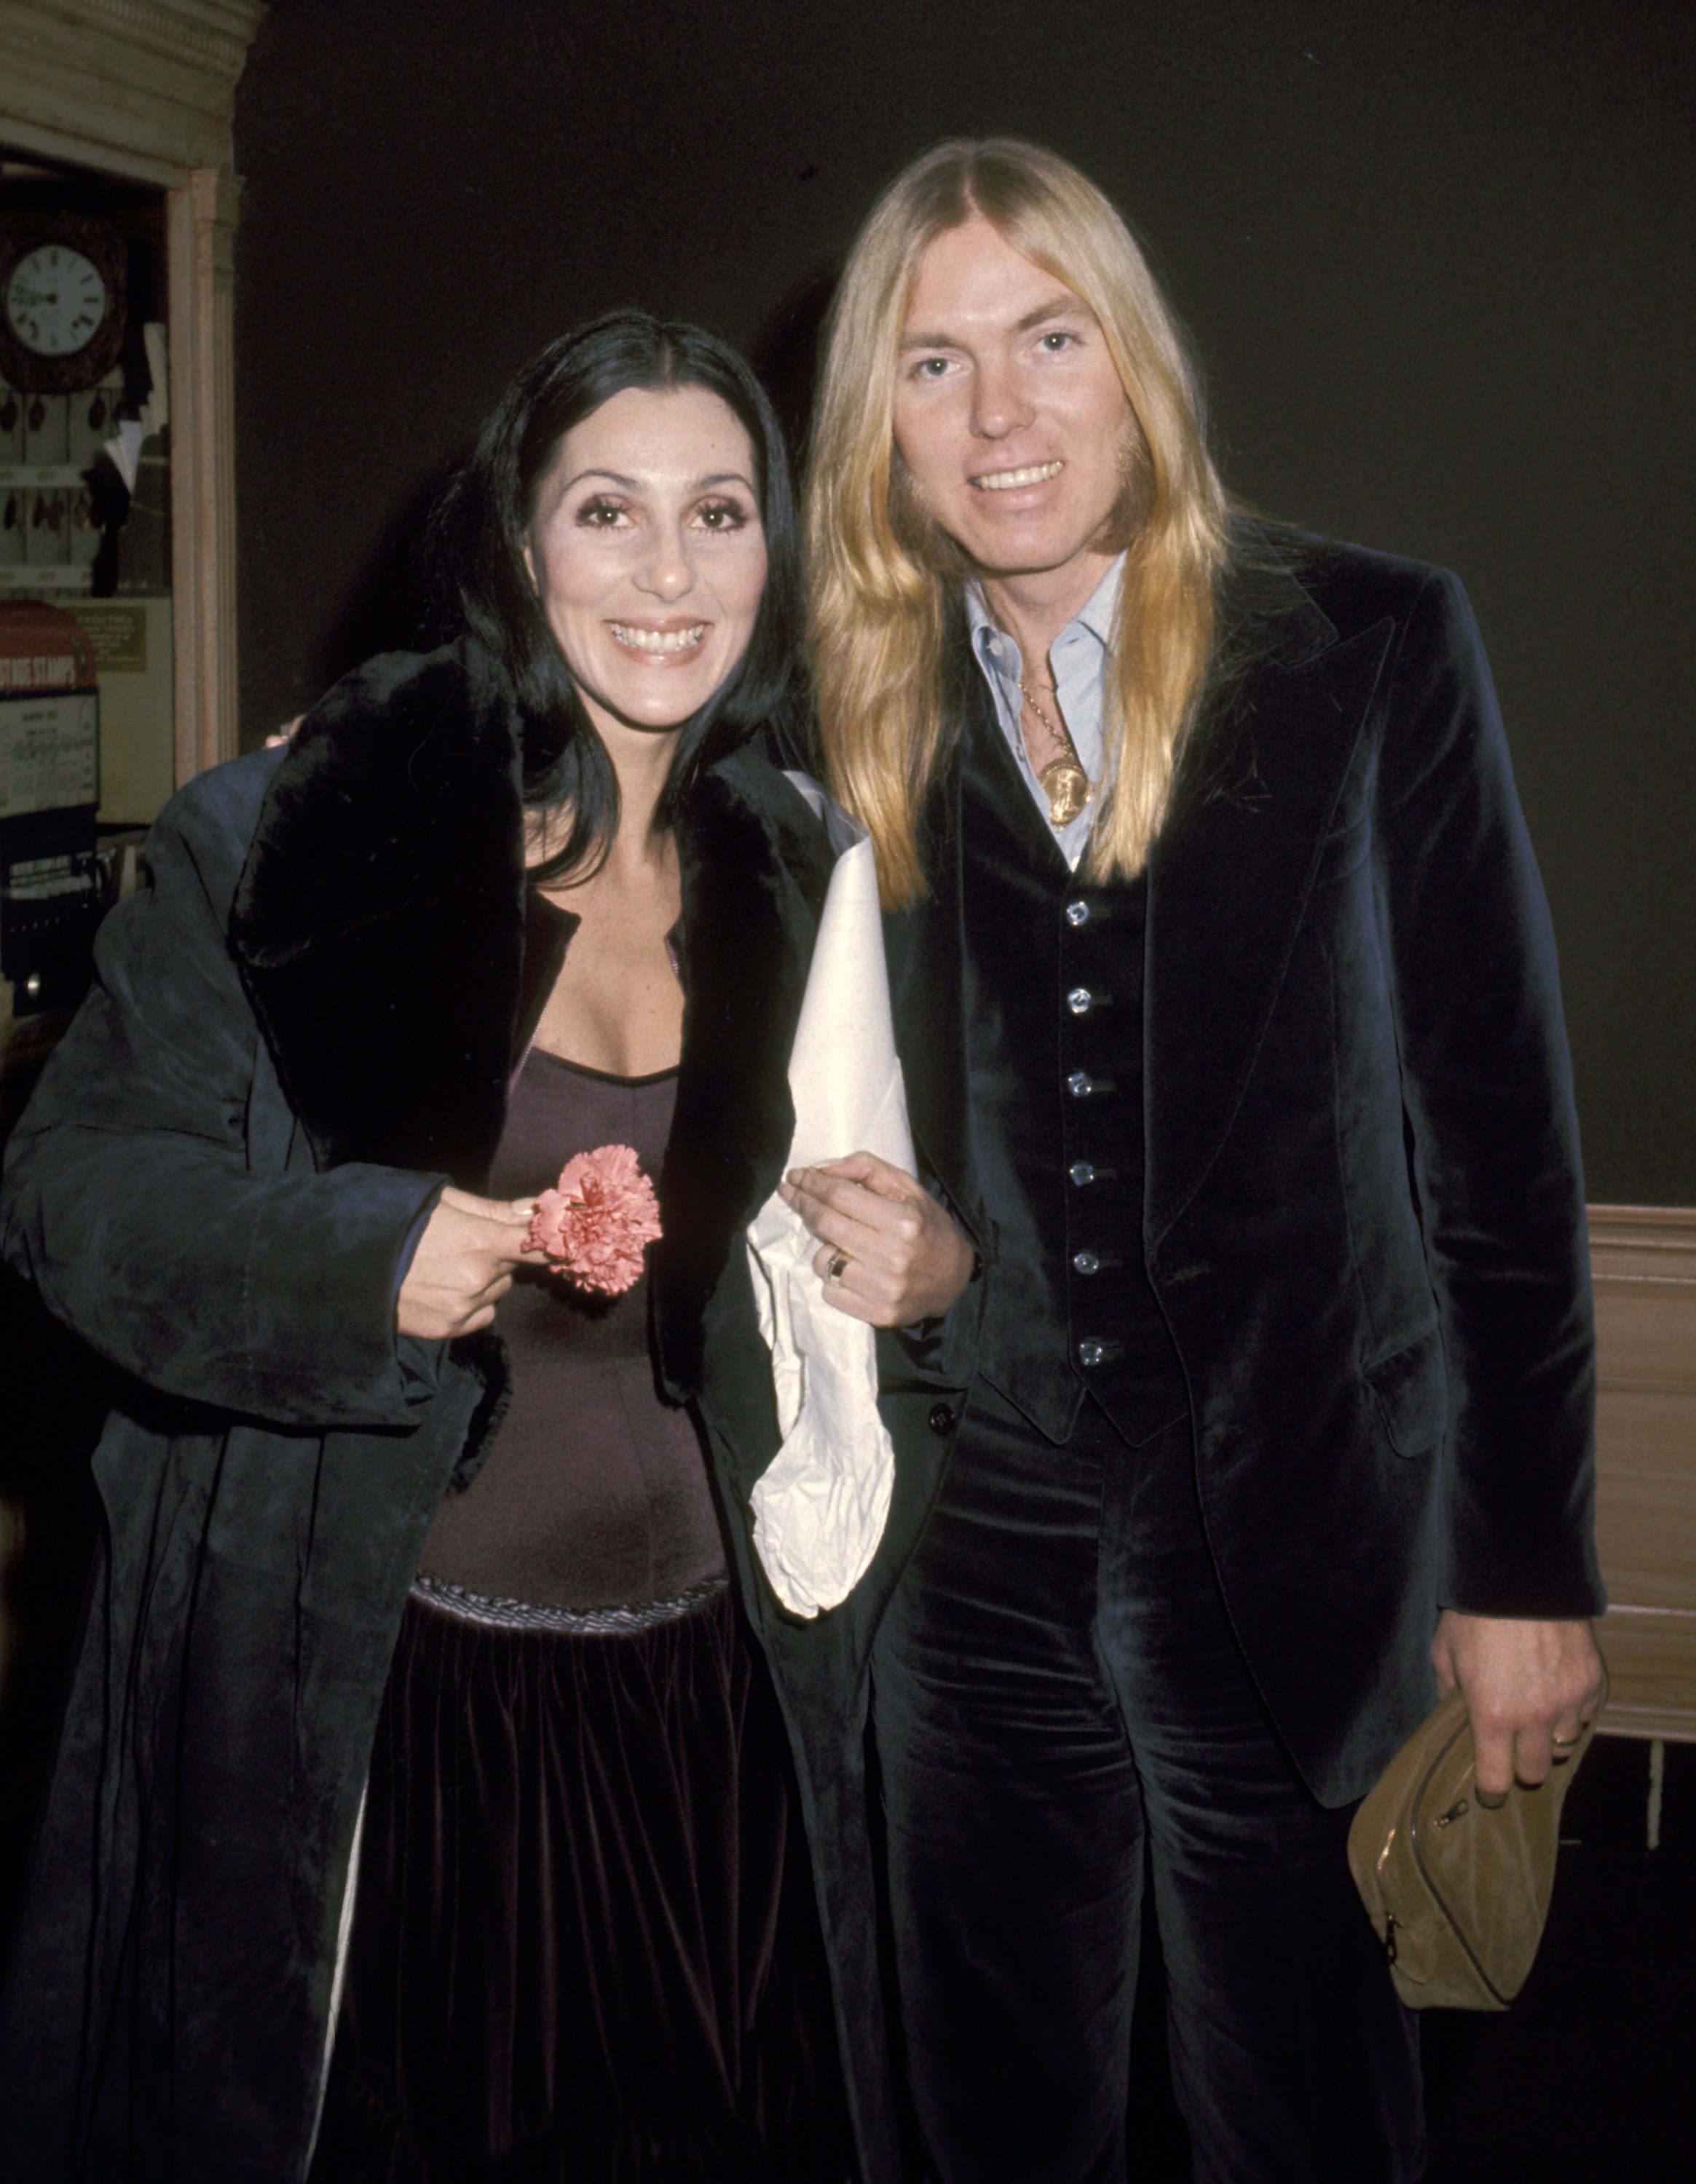 Cher and Gregg Allman at the Georgetown Inn for Jimmy Carter's Inauguration on January 21, 1977, in Washington D.C. | Source: Getty Images